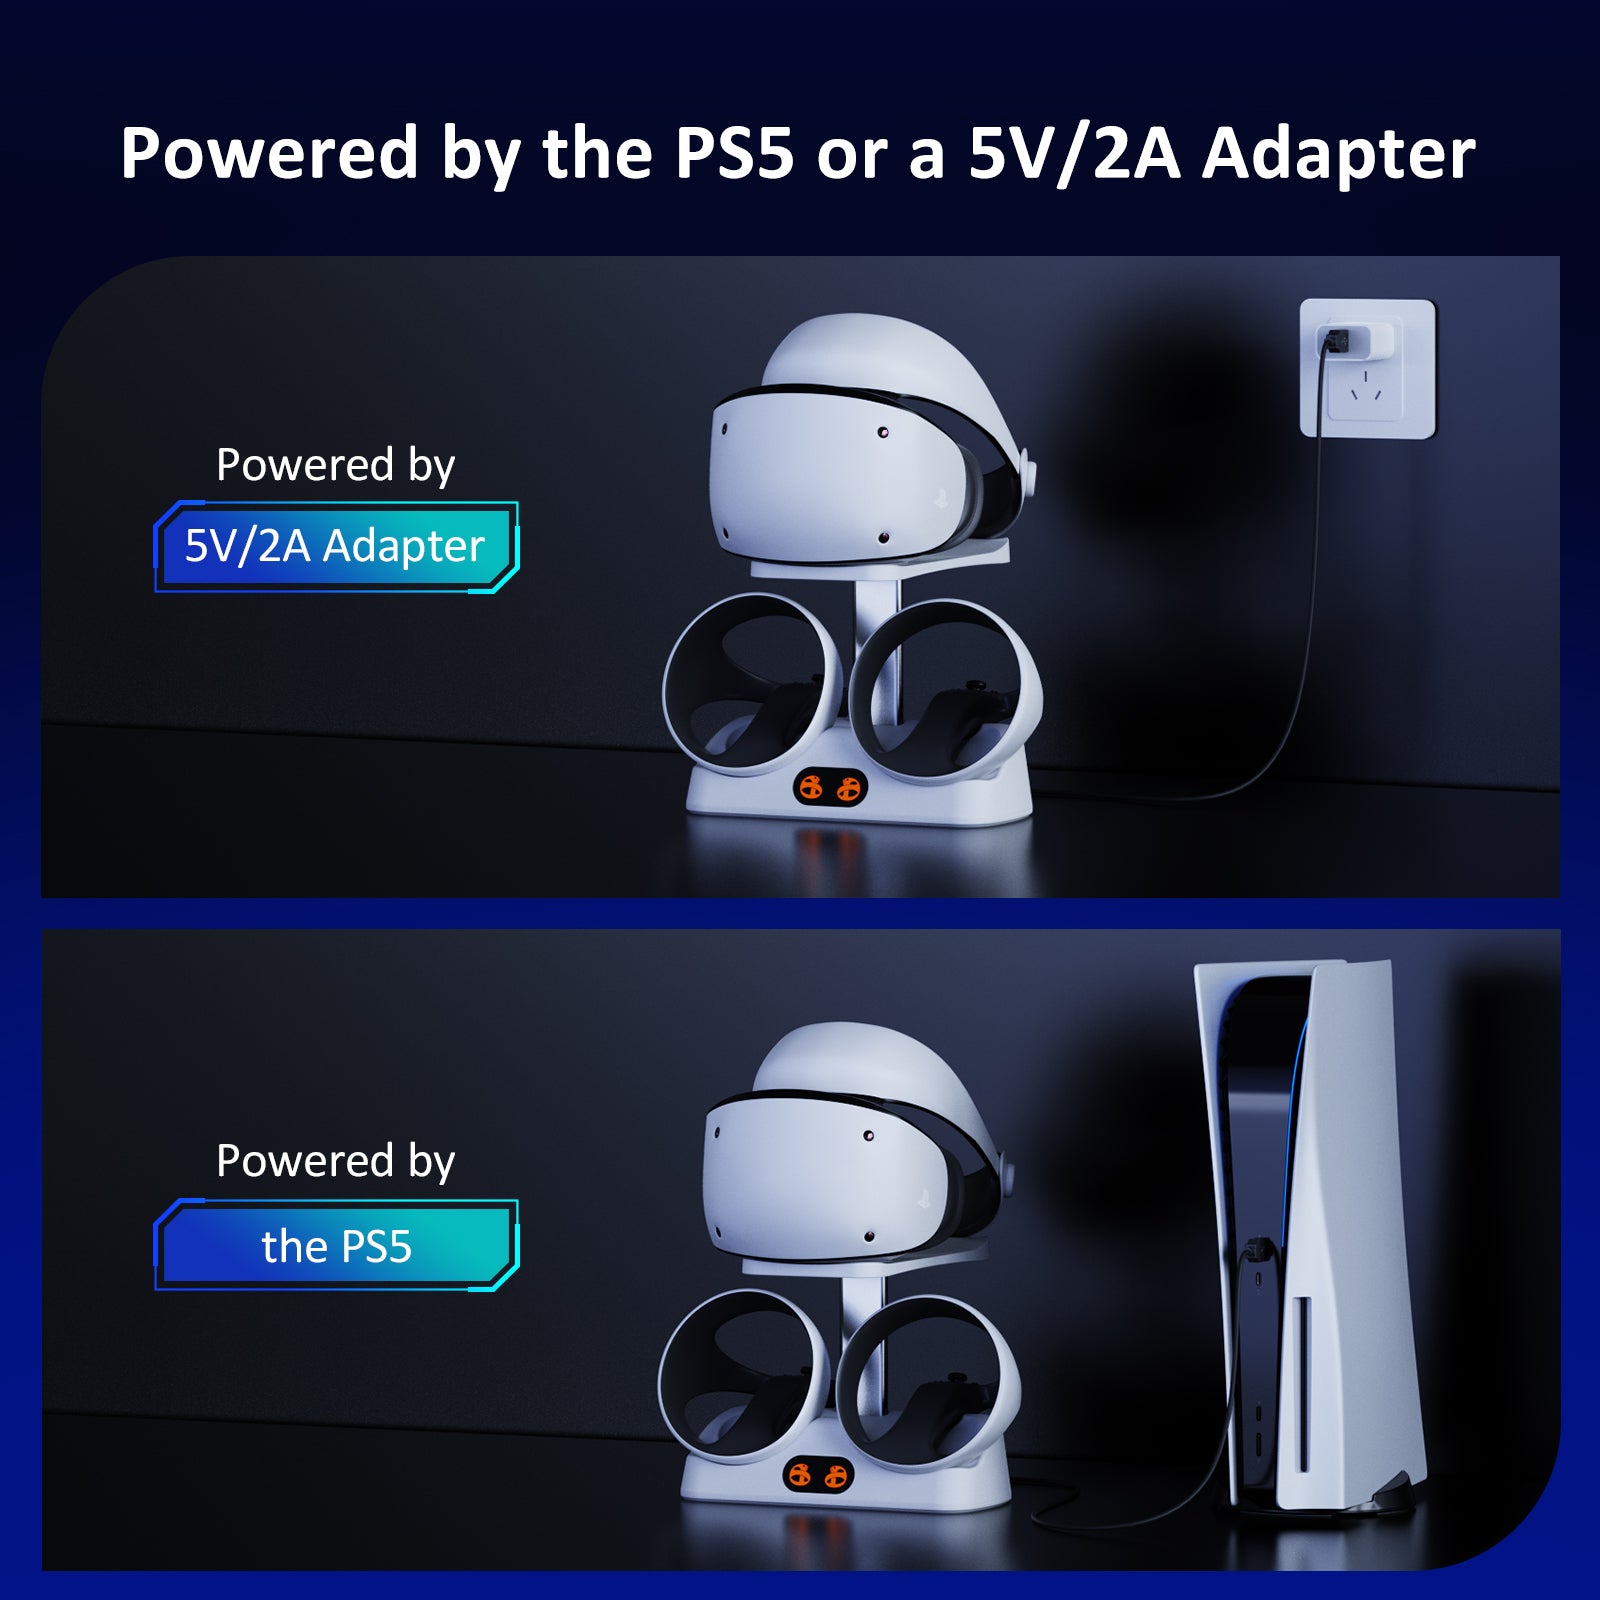 power by PS5 OR 5v/2A Adapter